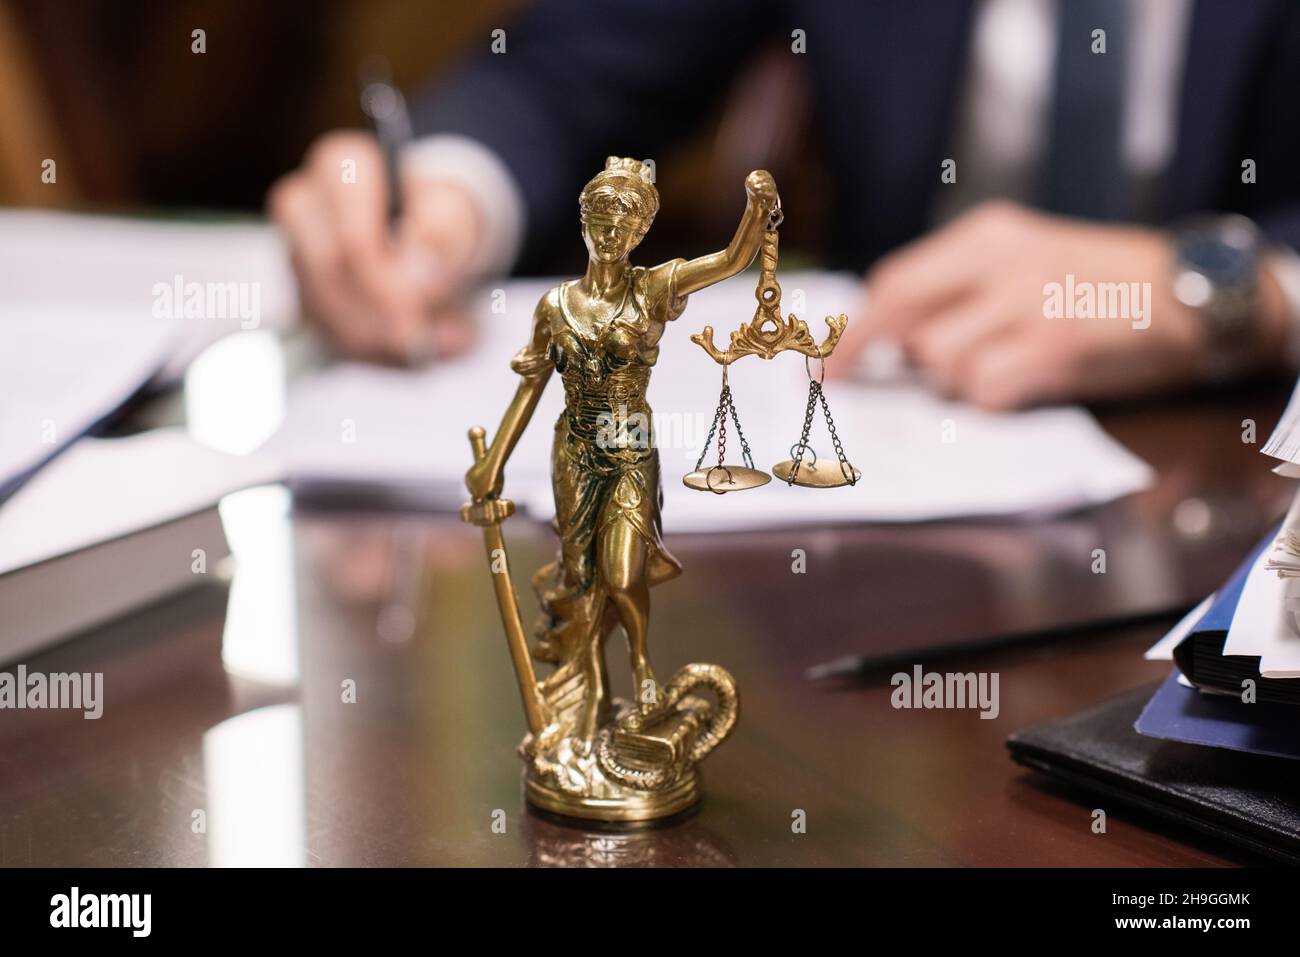 Statue of Lady Justice with her eyes bound holding scales against hands of contemporary lawyer signing papers Stock Photo